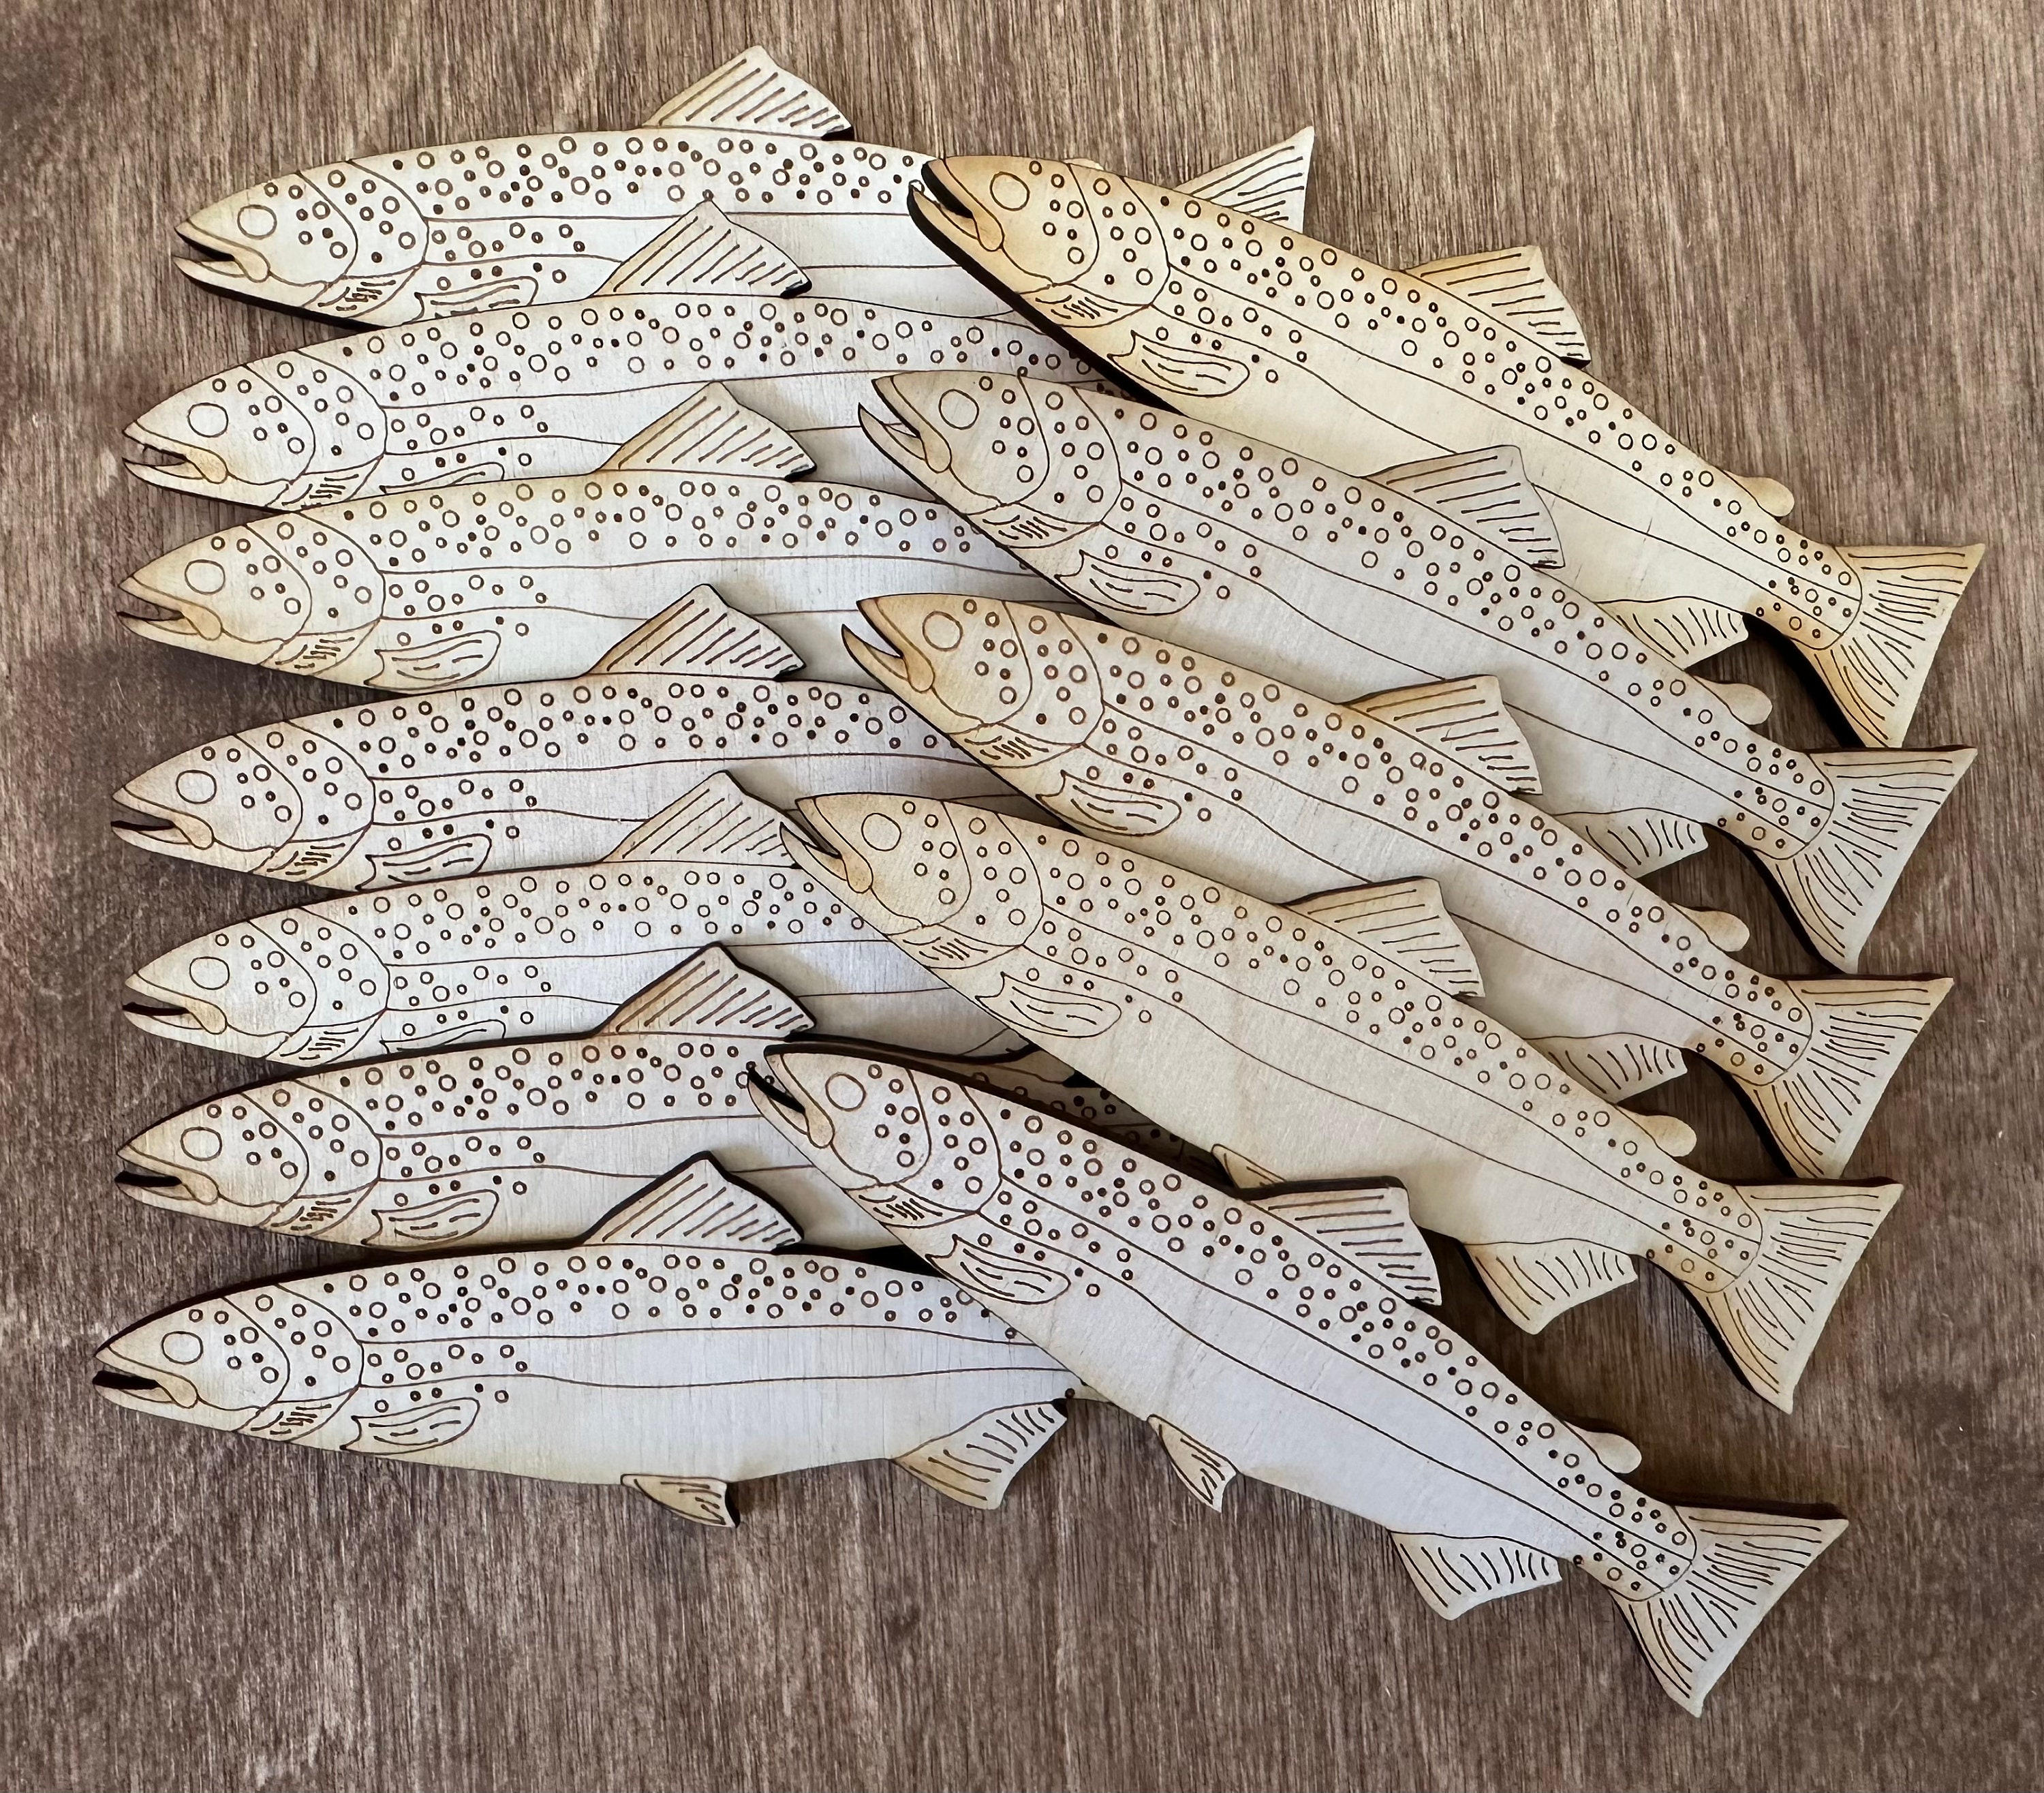 Unfinished Wooden Fish Cutout, 12, Pack of 1 Wooden Shapes for Crafts, Use for Summer, Beach & Nautical Decor and Crafting, by Woodpeckers